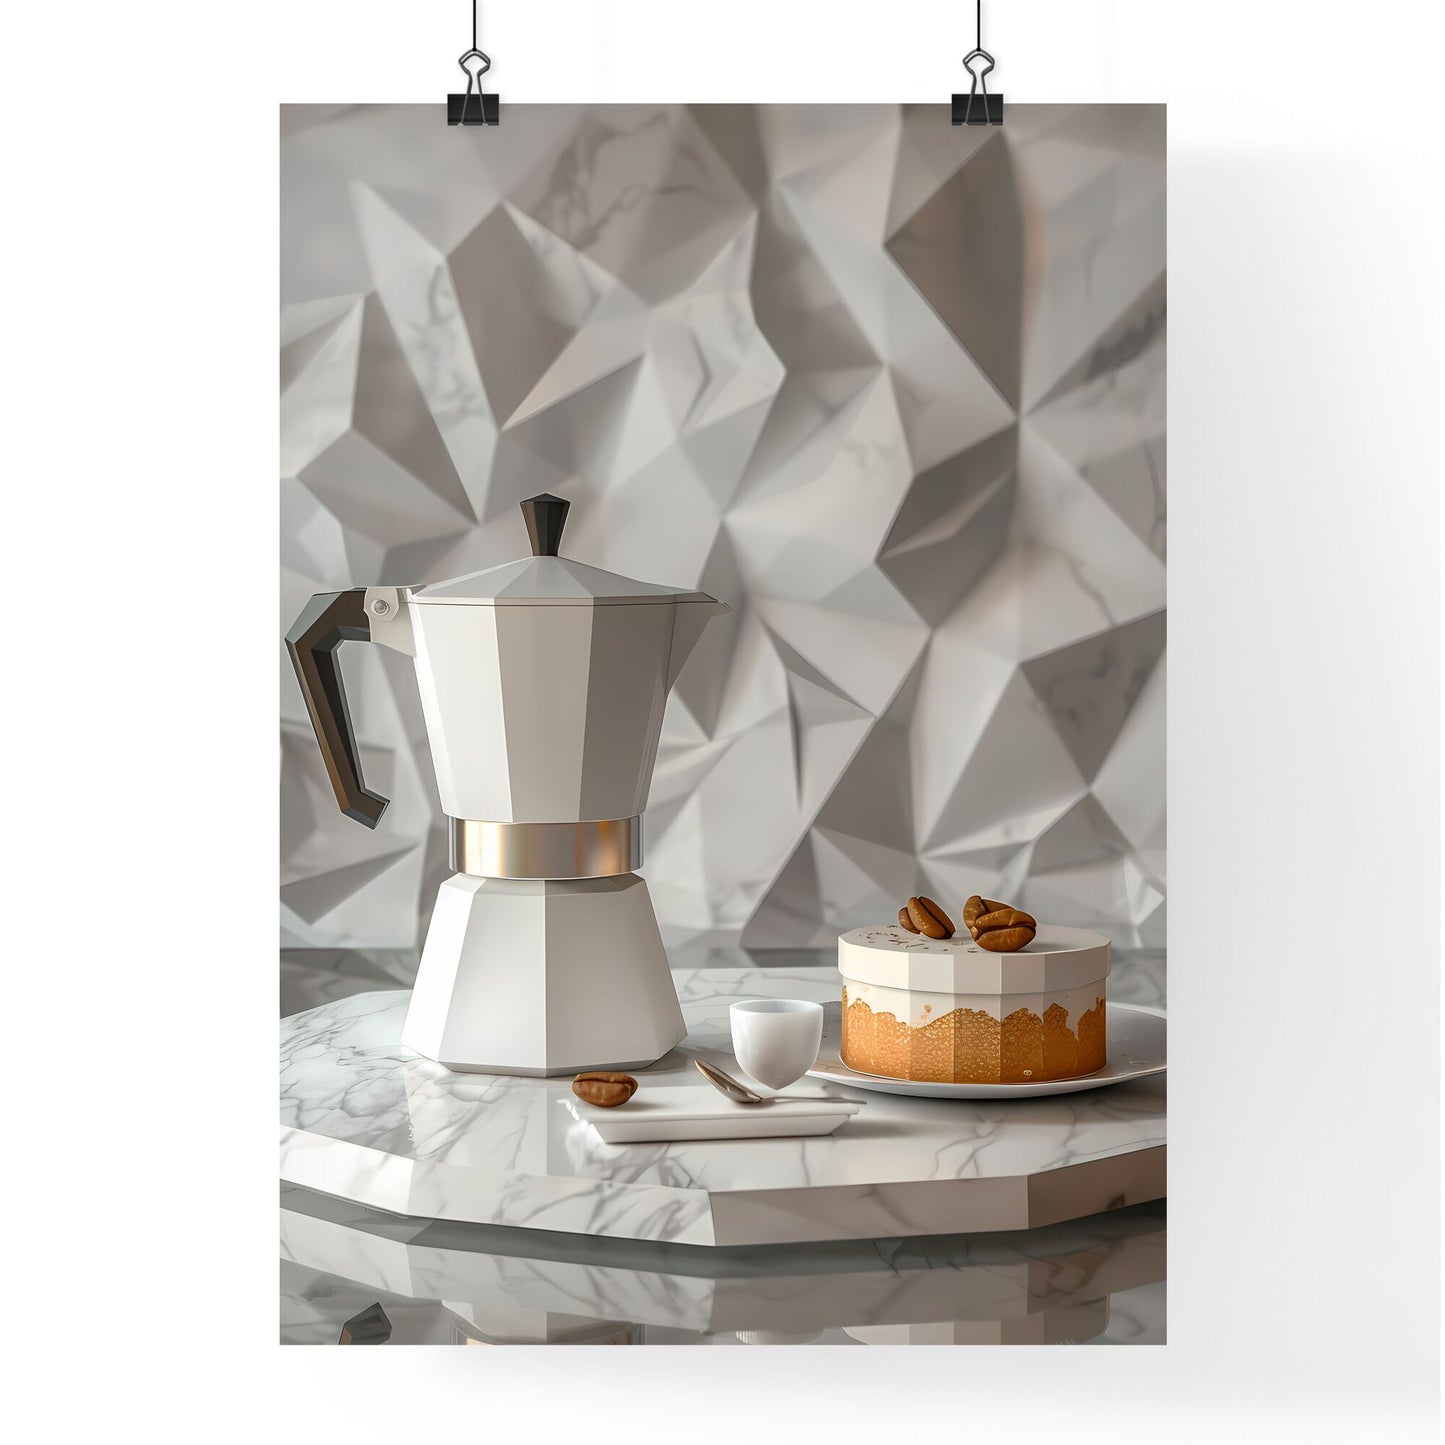 Moka Pot and Coffee Cake Origami Cubism 3D Model on Marble Table UHD 16K Painting Art Default Title